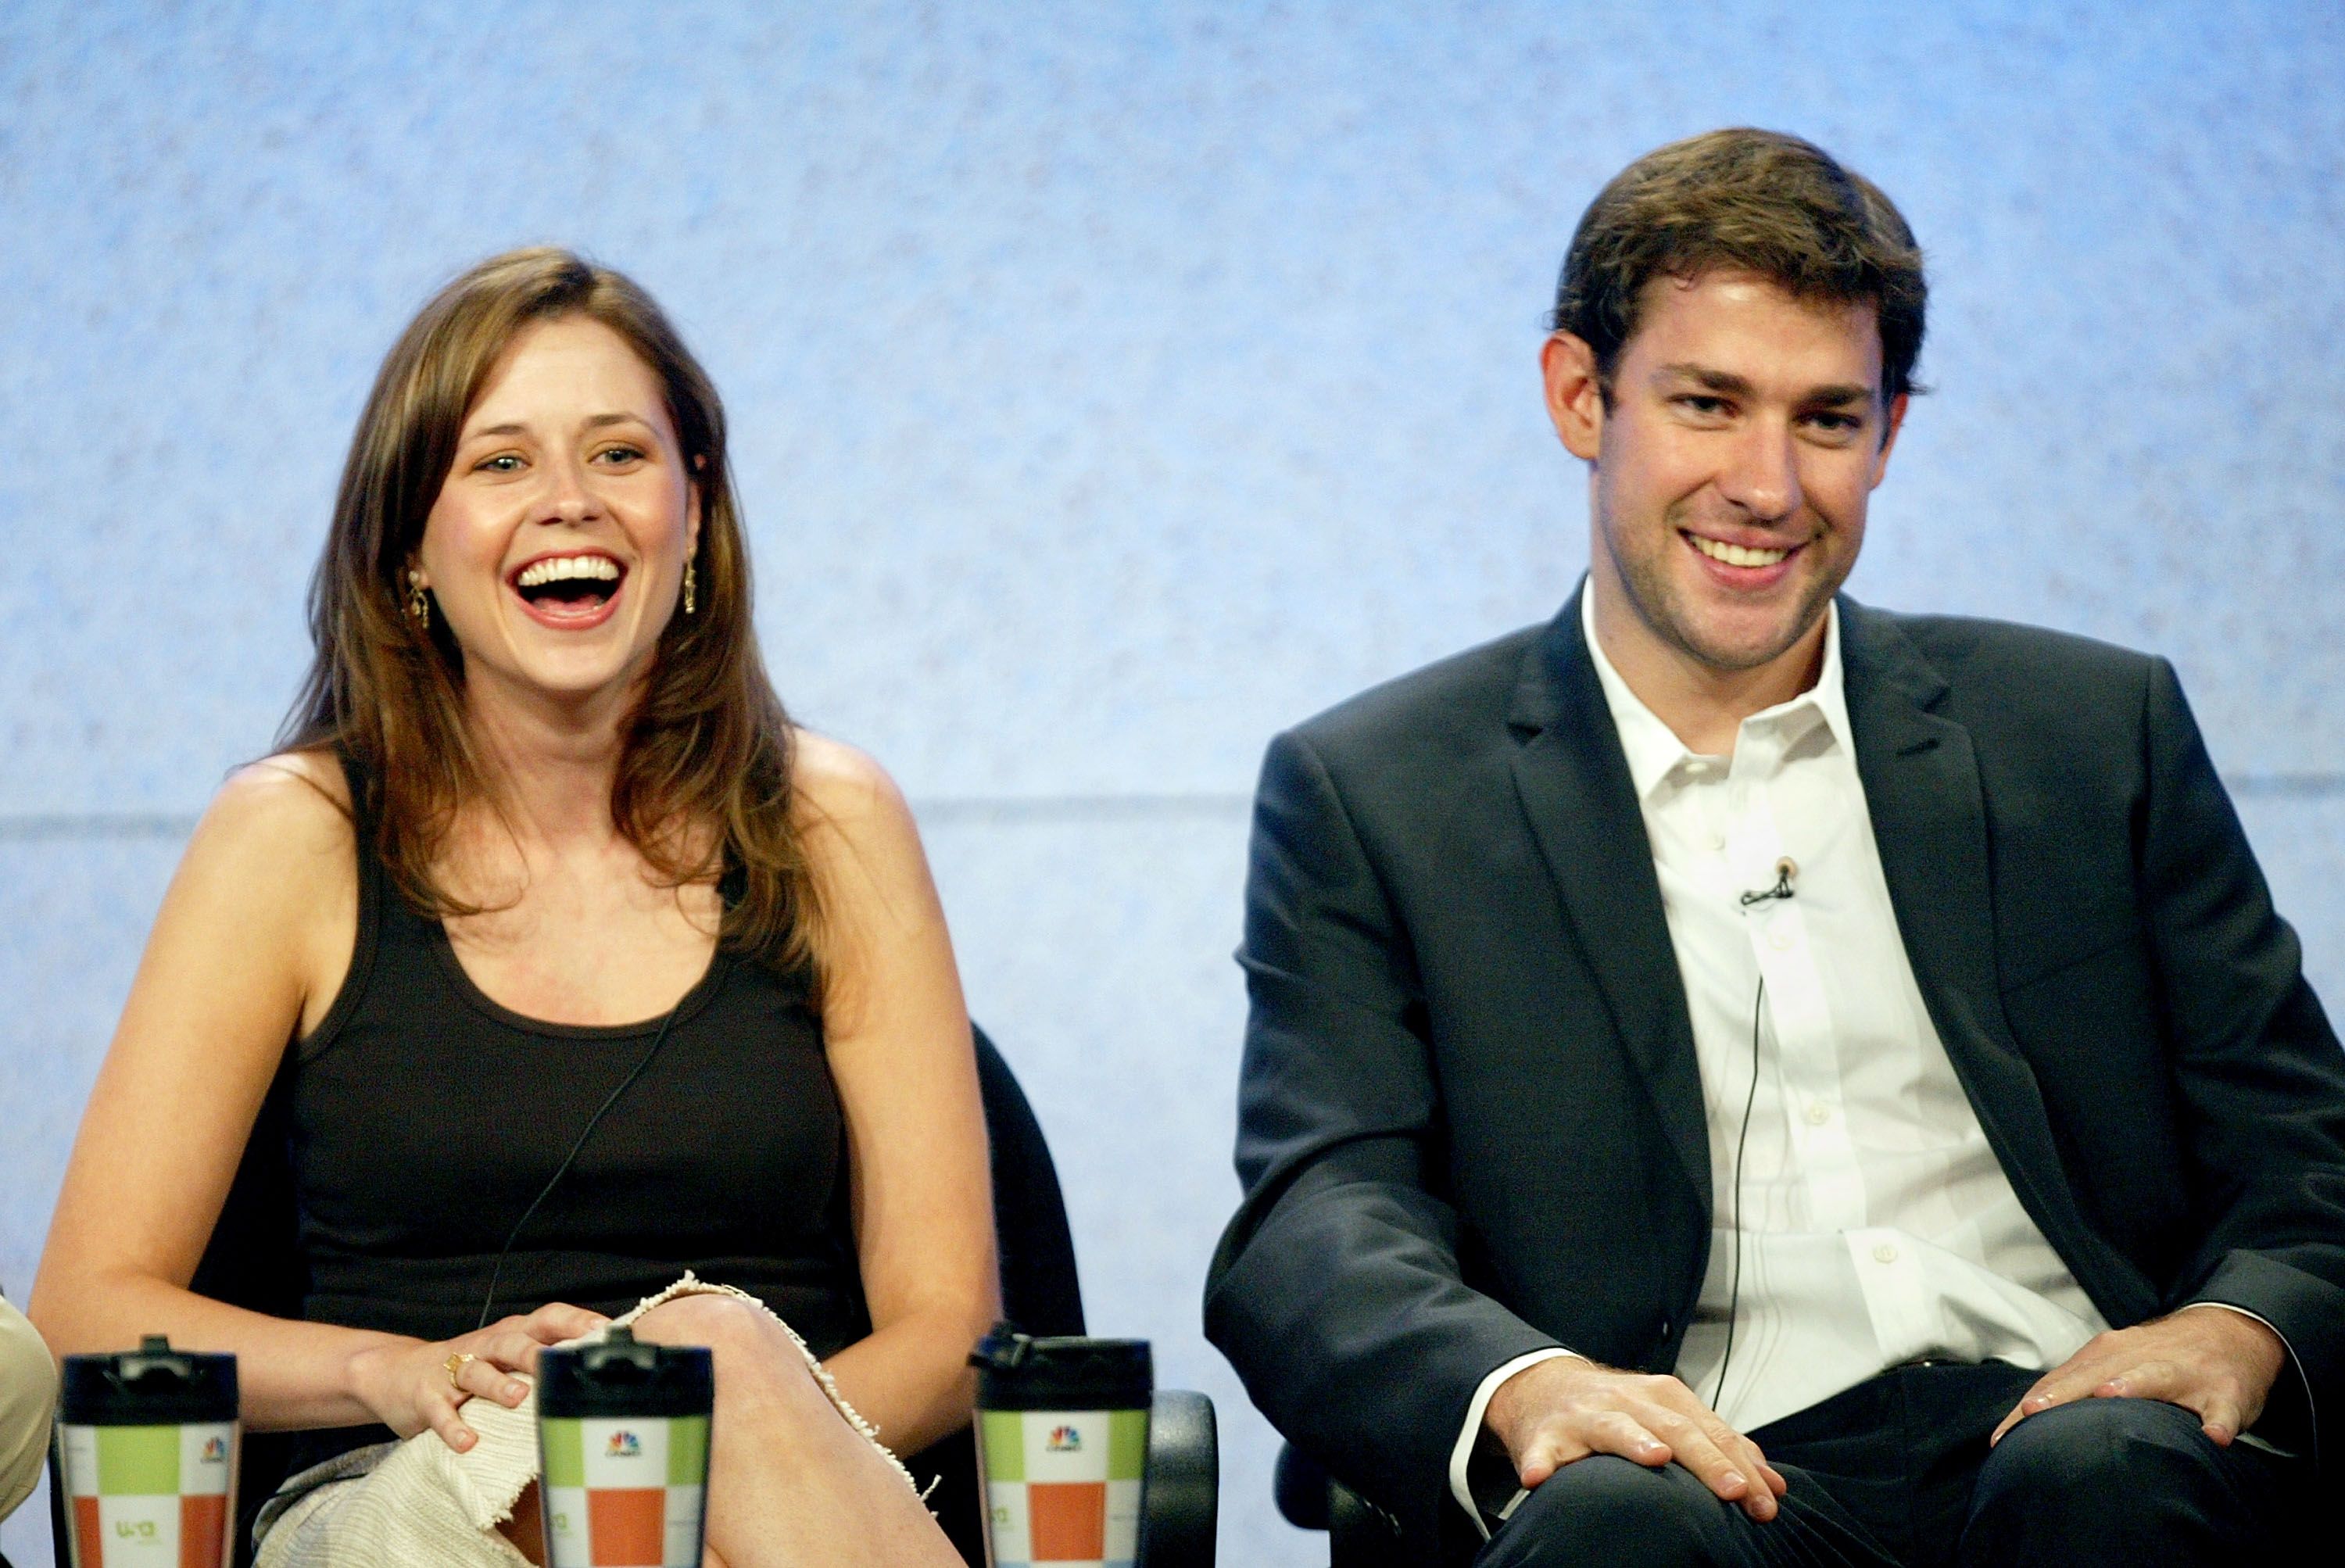 What is in the teapot note?': Jenna Fischer reveals what was in the note Jim gave Pam on 'The Office'